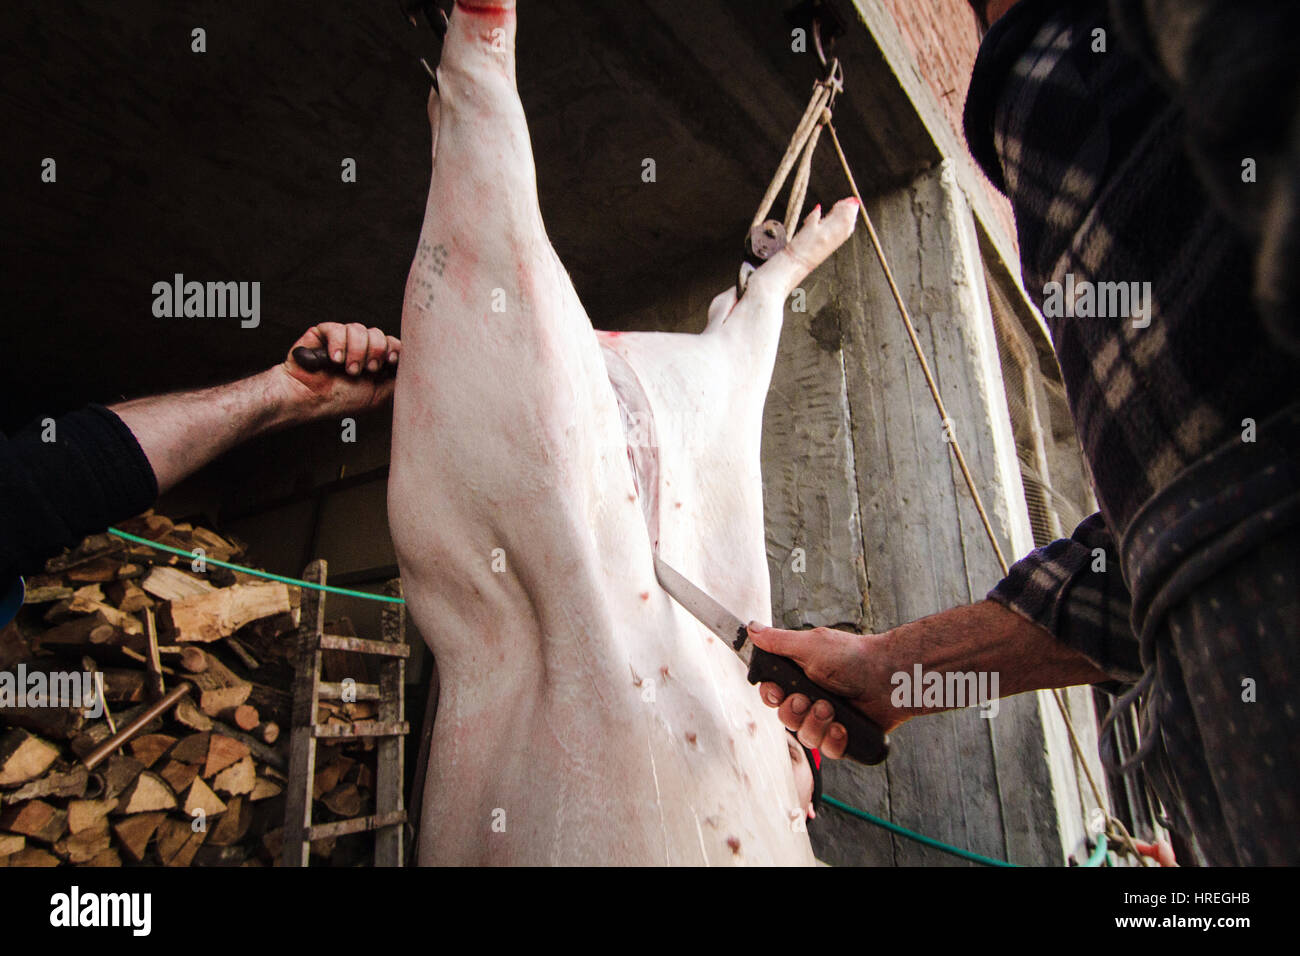 Dead pig cut open by two people in a slaughterhouse in Alba, which is located in the province of Piedmont, Italy. Stock Photo